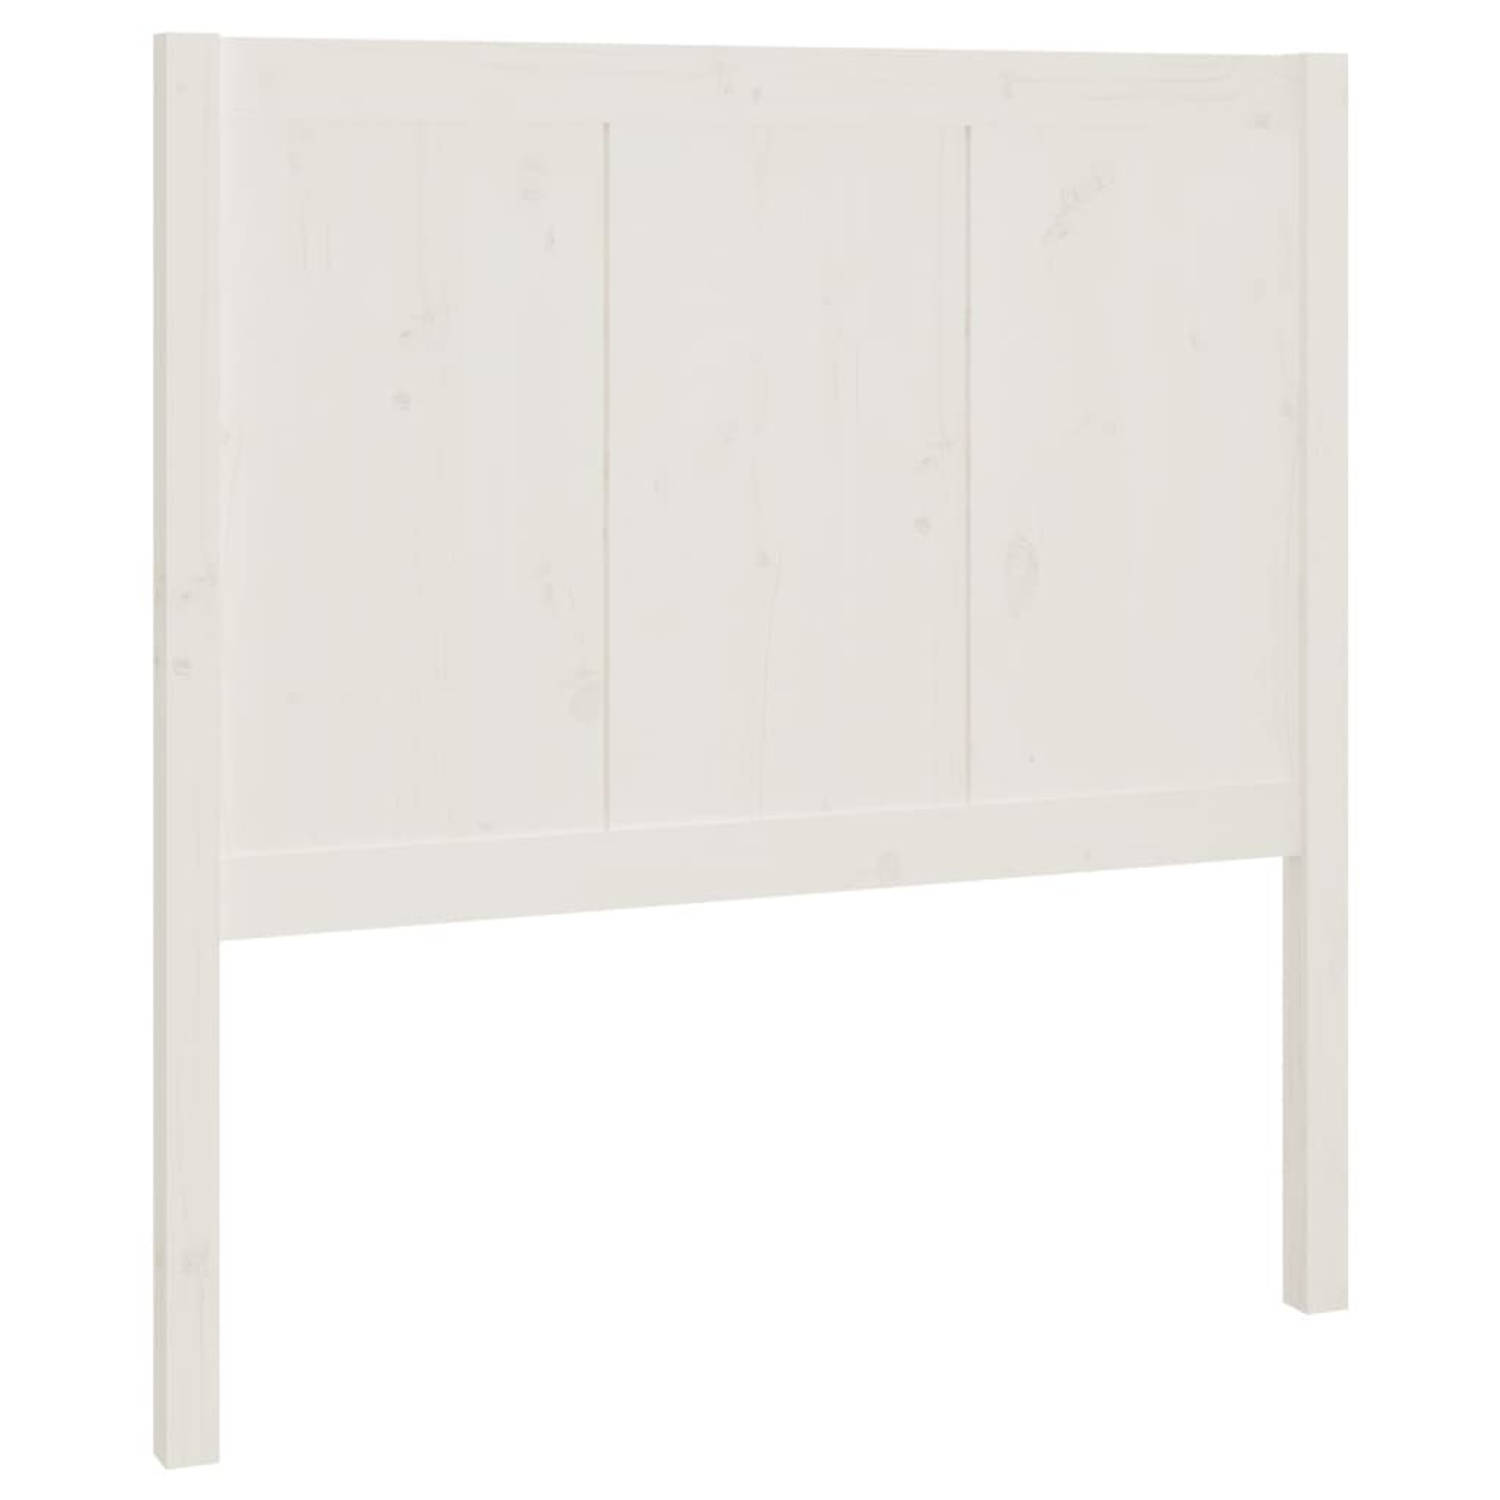 The Living Store Hoofdeinde s Hout - 80.5 x 4 x 100 cm - Wit